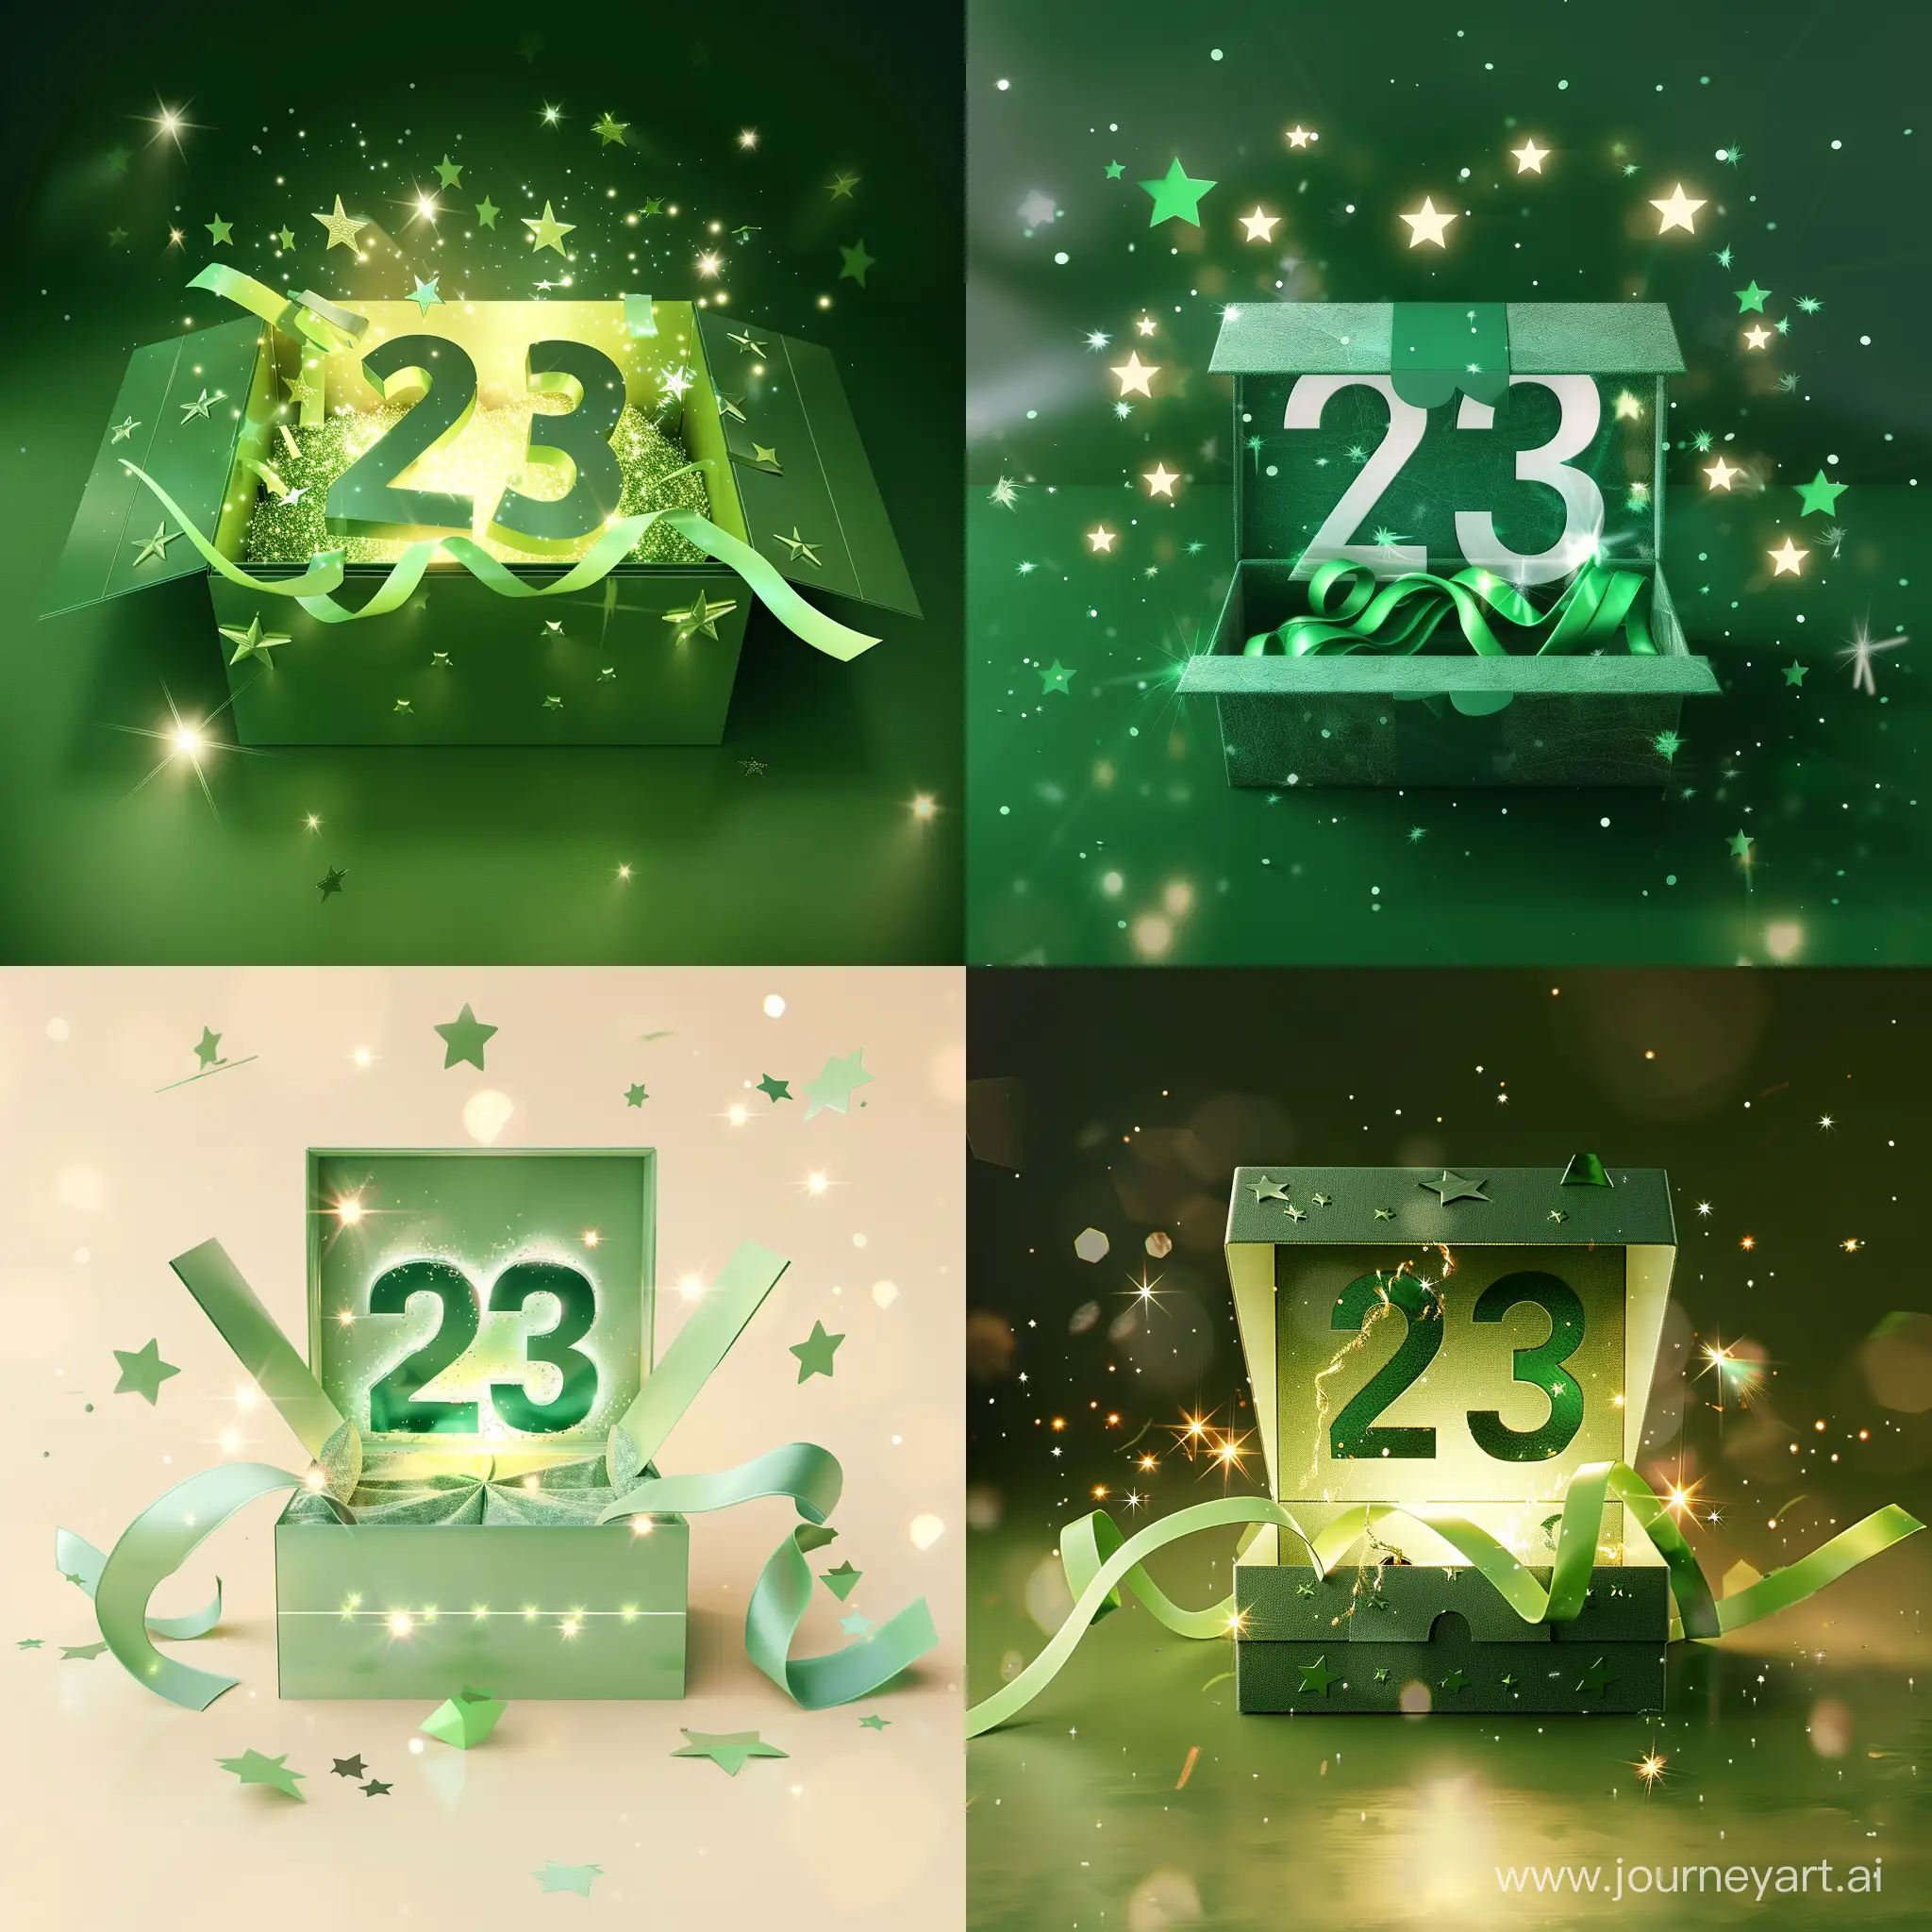 3d green box opened, number 23 in 3d style is outside the box, 3d stars around, 3d ribbon across, light spots